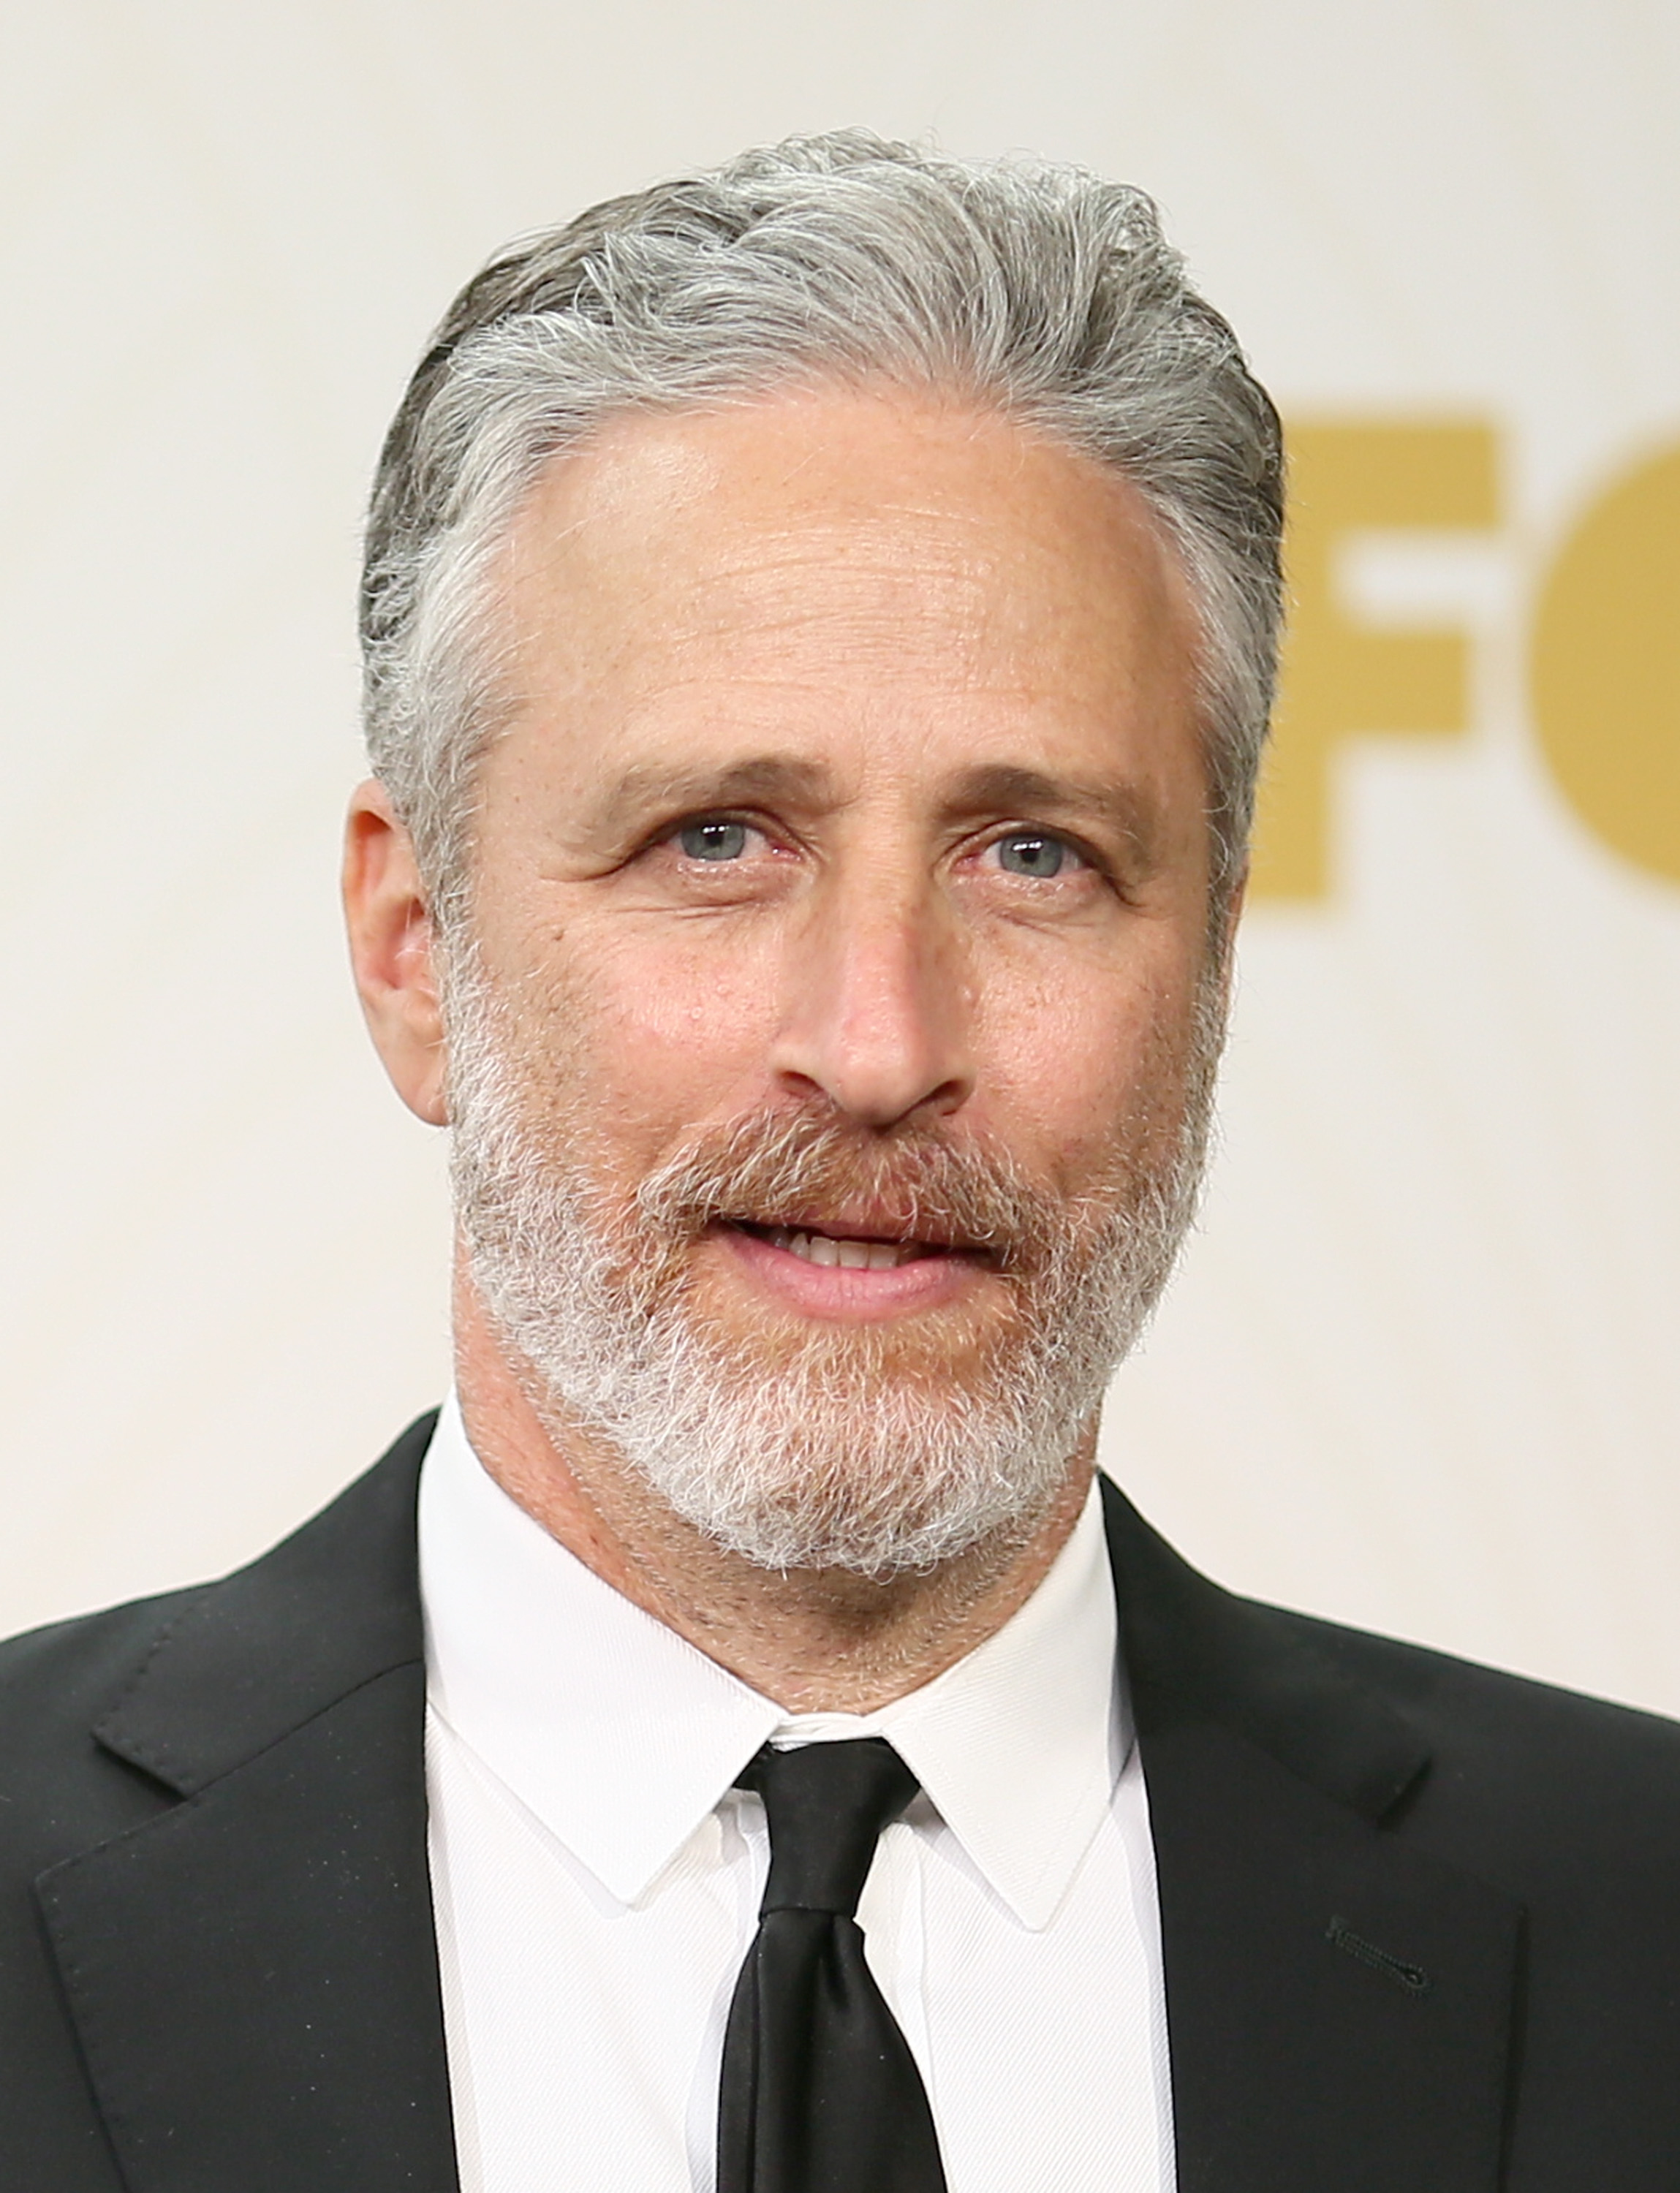 Jon Stewart at the 67th Annual Primetime Emmy Awards in Los Angeles on Sept. 20, 2015.